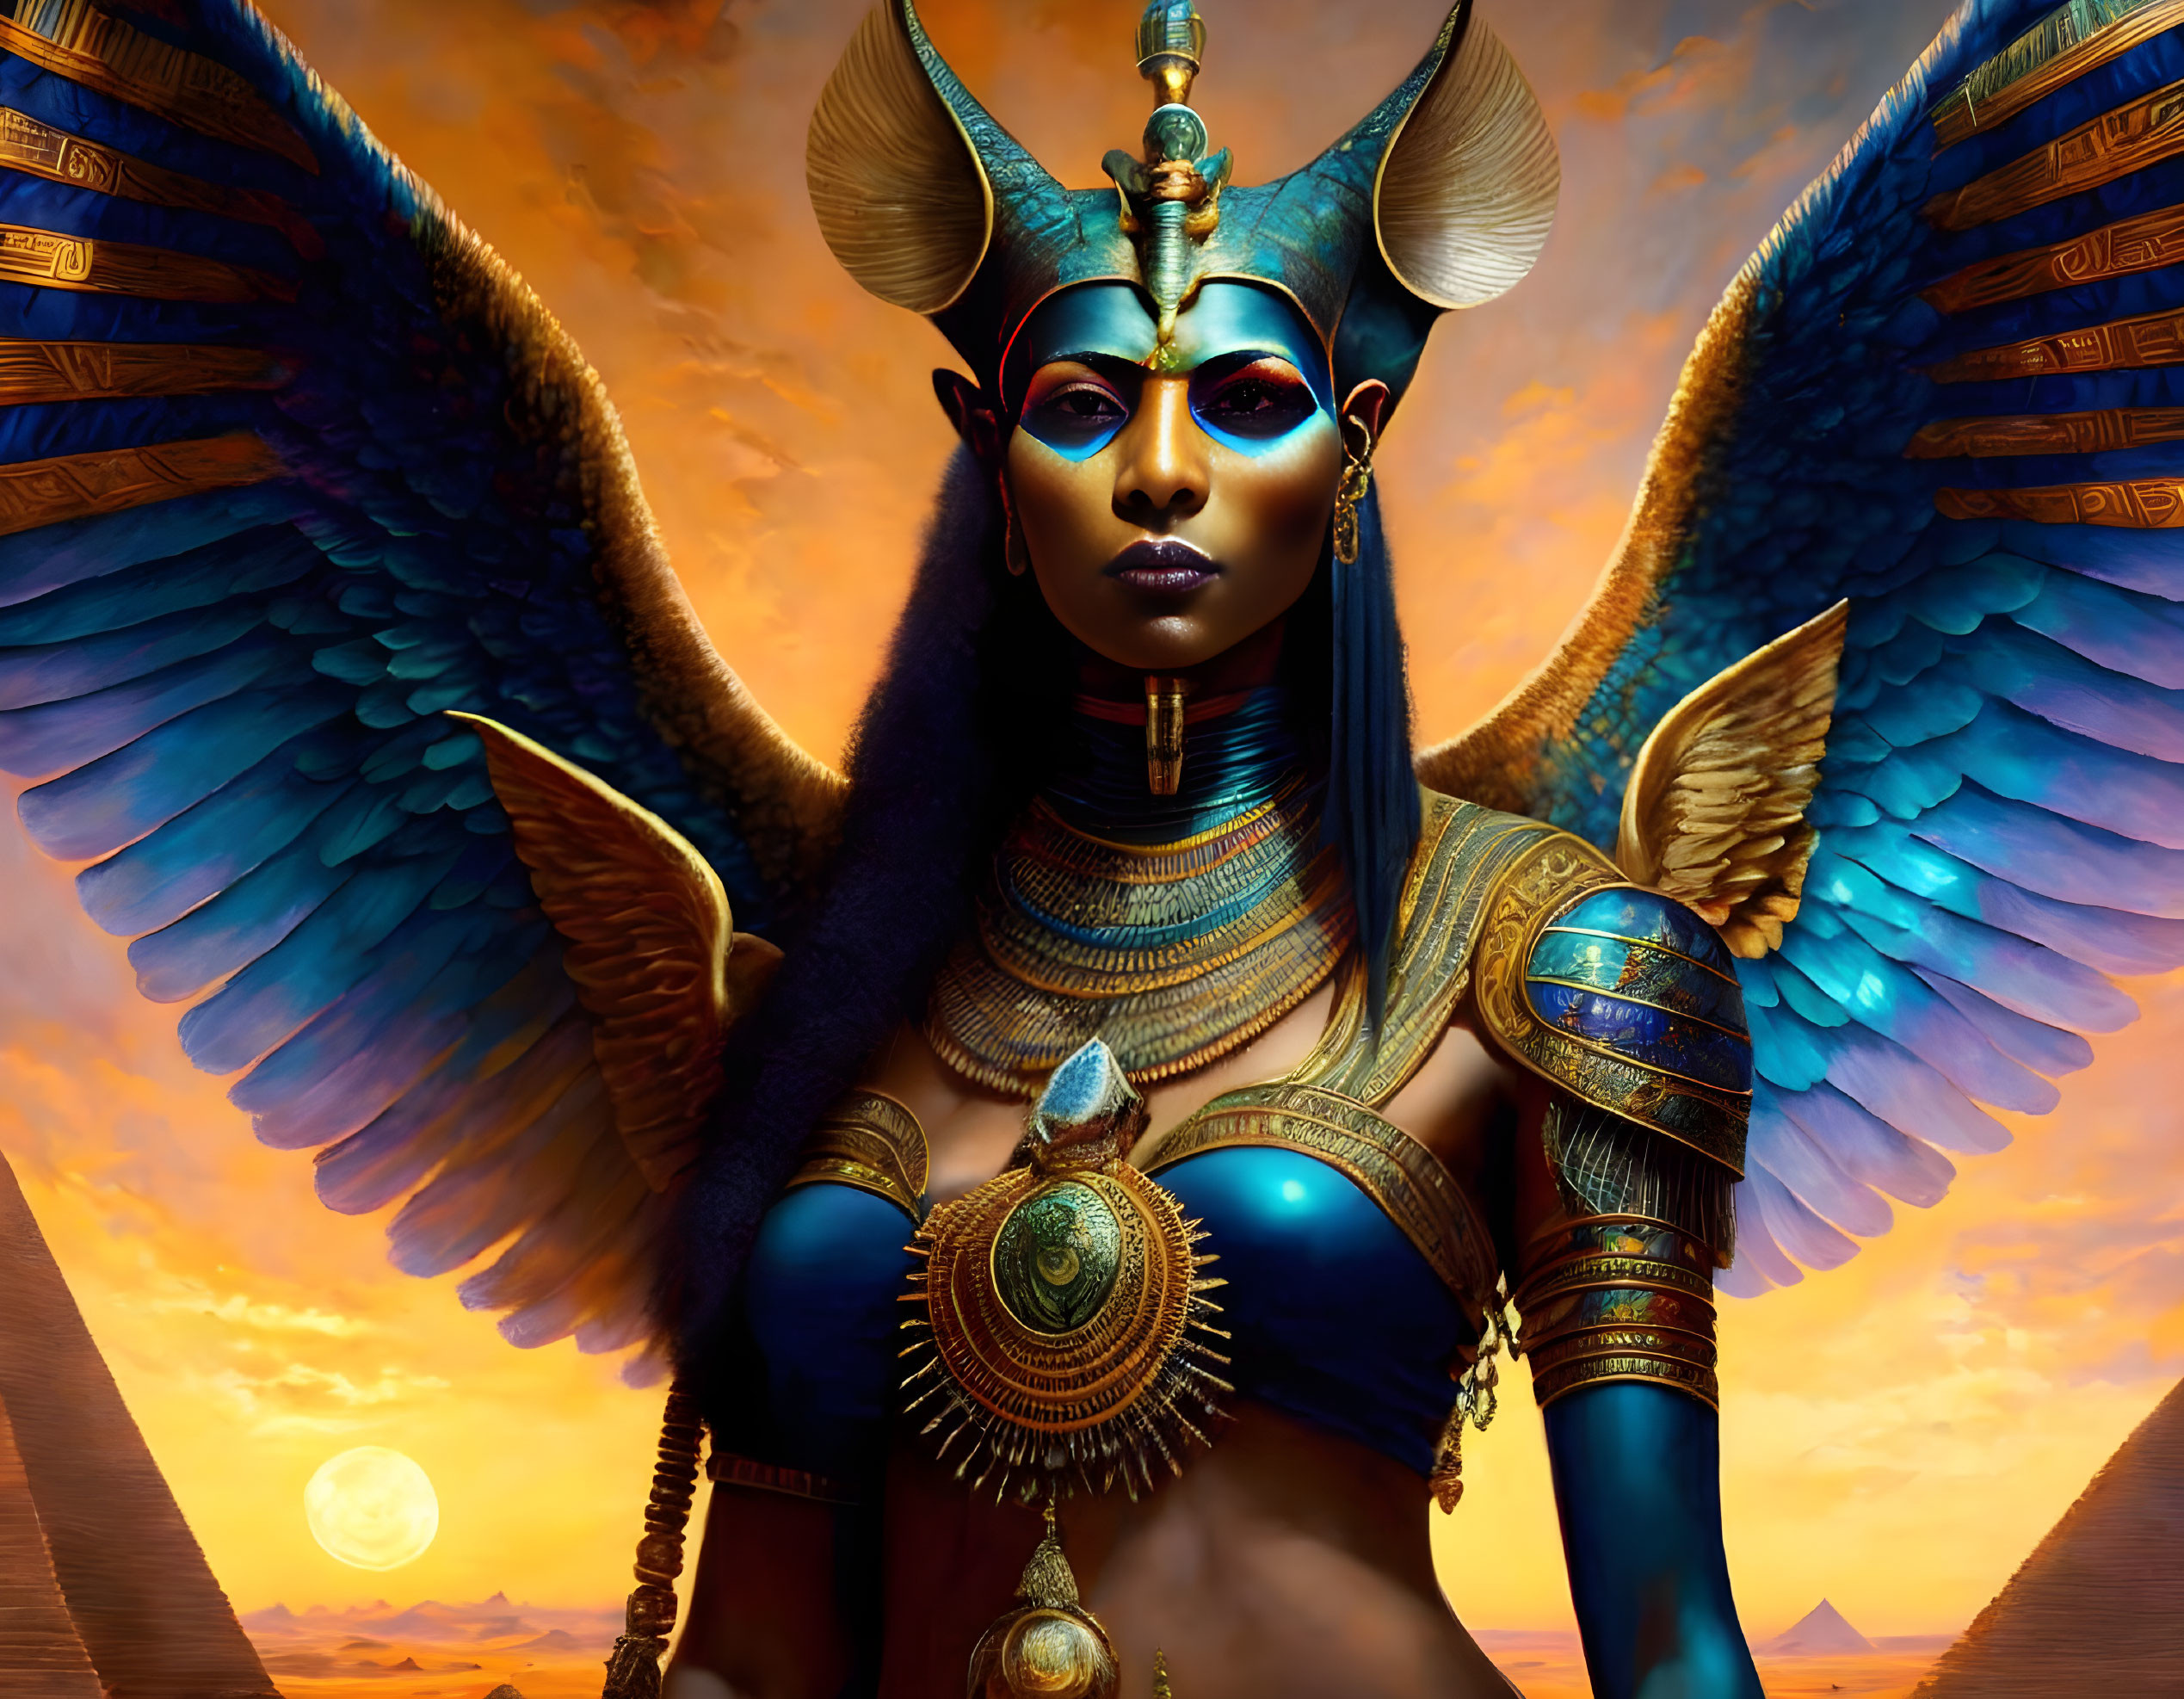 Digital Art: Ancient Egyptian Goddess with Wings and Pyramids at Sunset